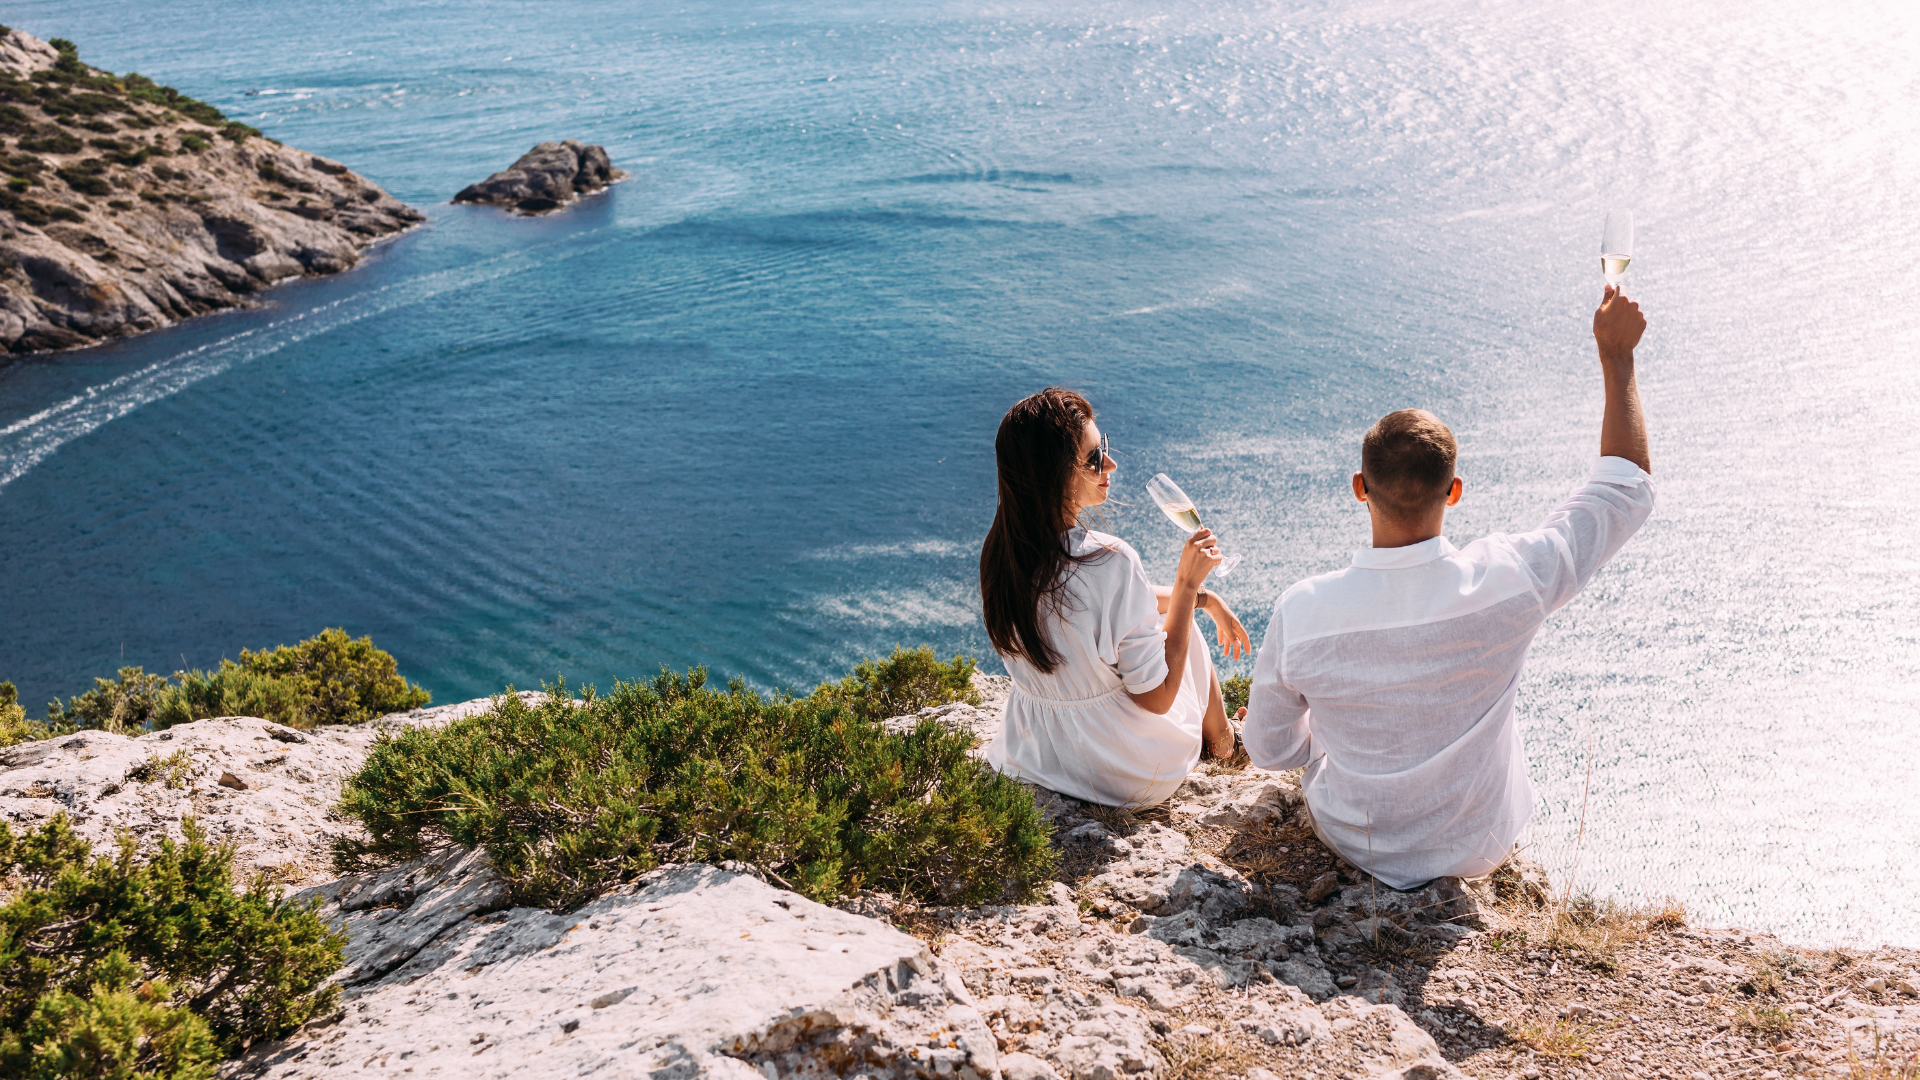 Honeymoon, Couple Drinking Champagne on a Cliff